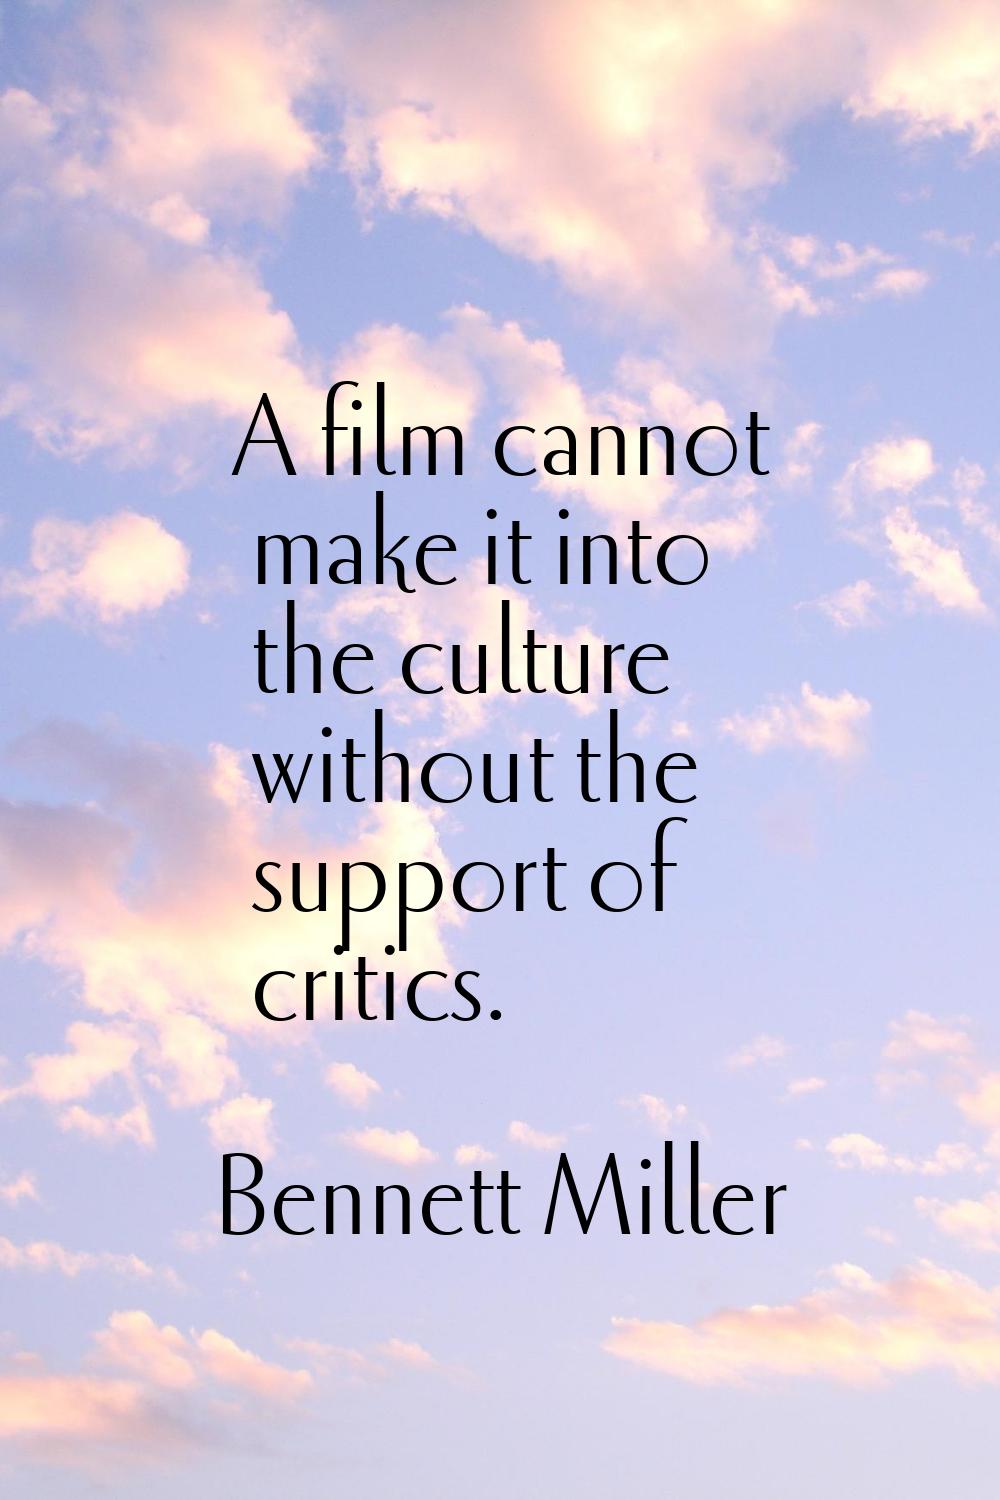 A film cannot make it into the culture without the support of critics.